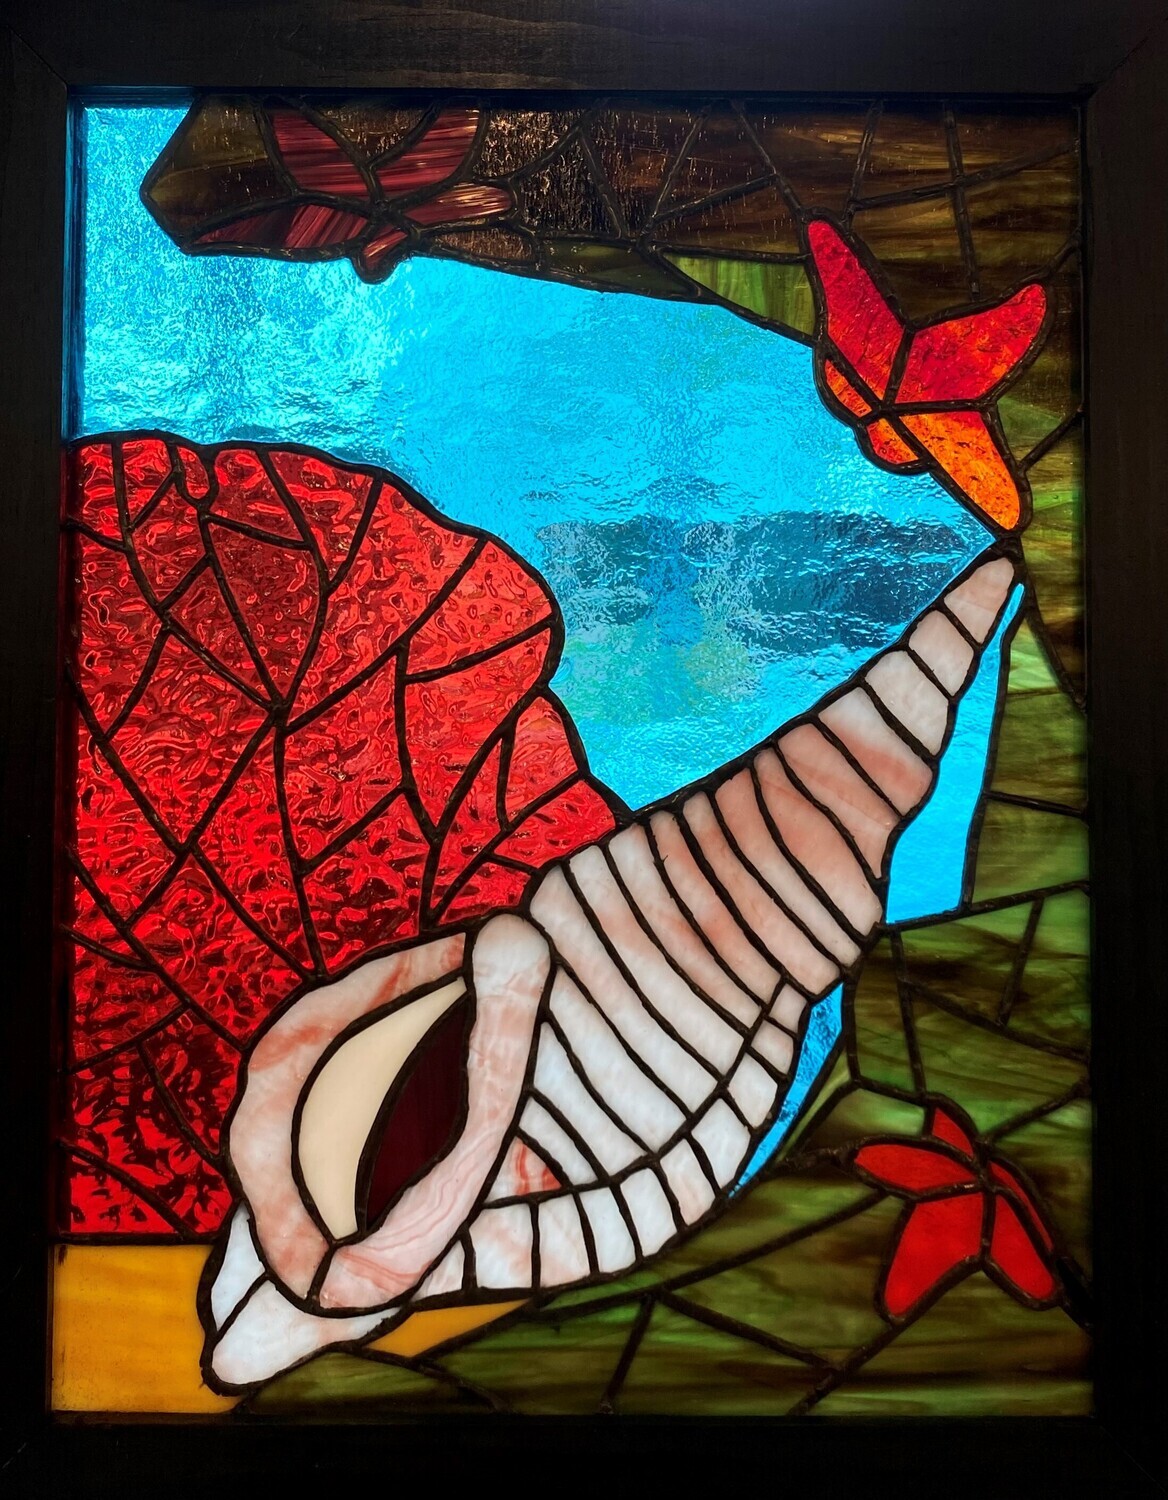 "Seashell" Framed Stained Glass Hanging 16.5x13.5"